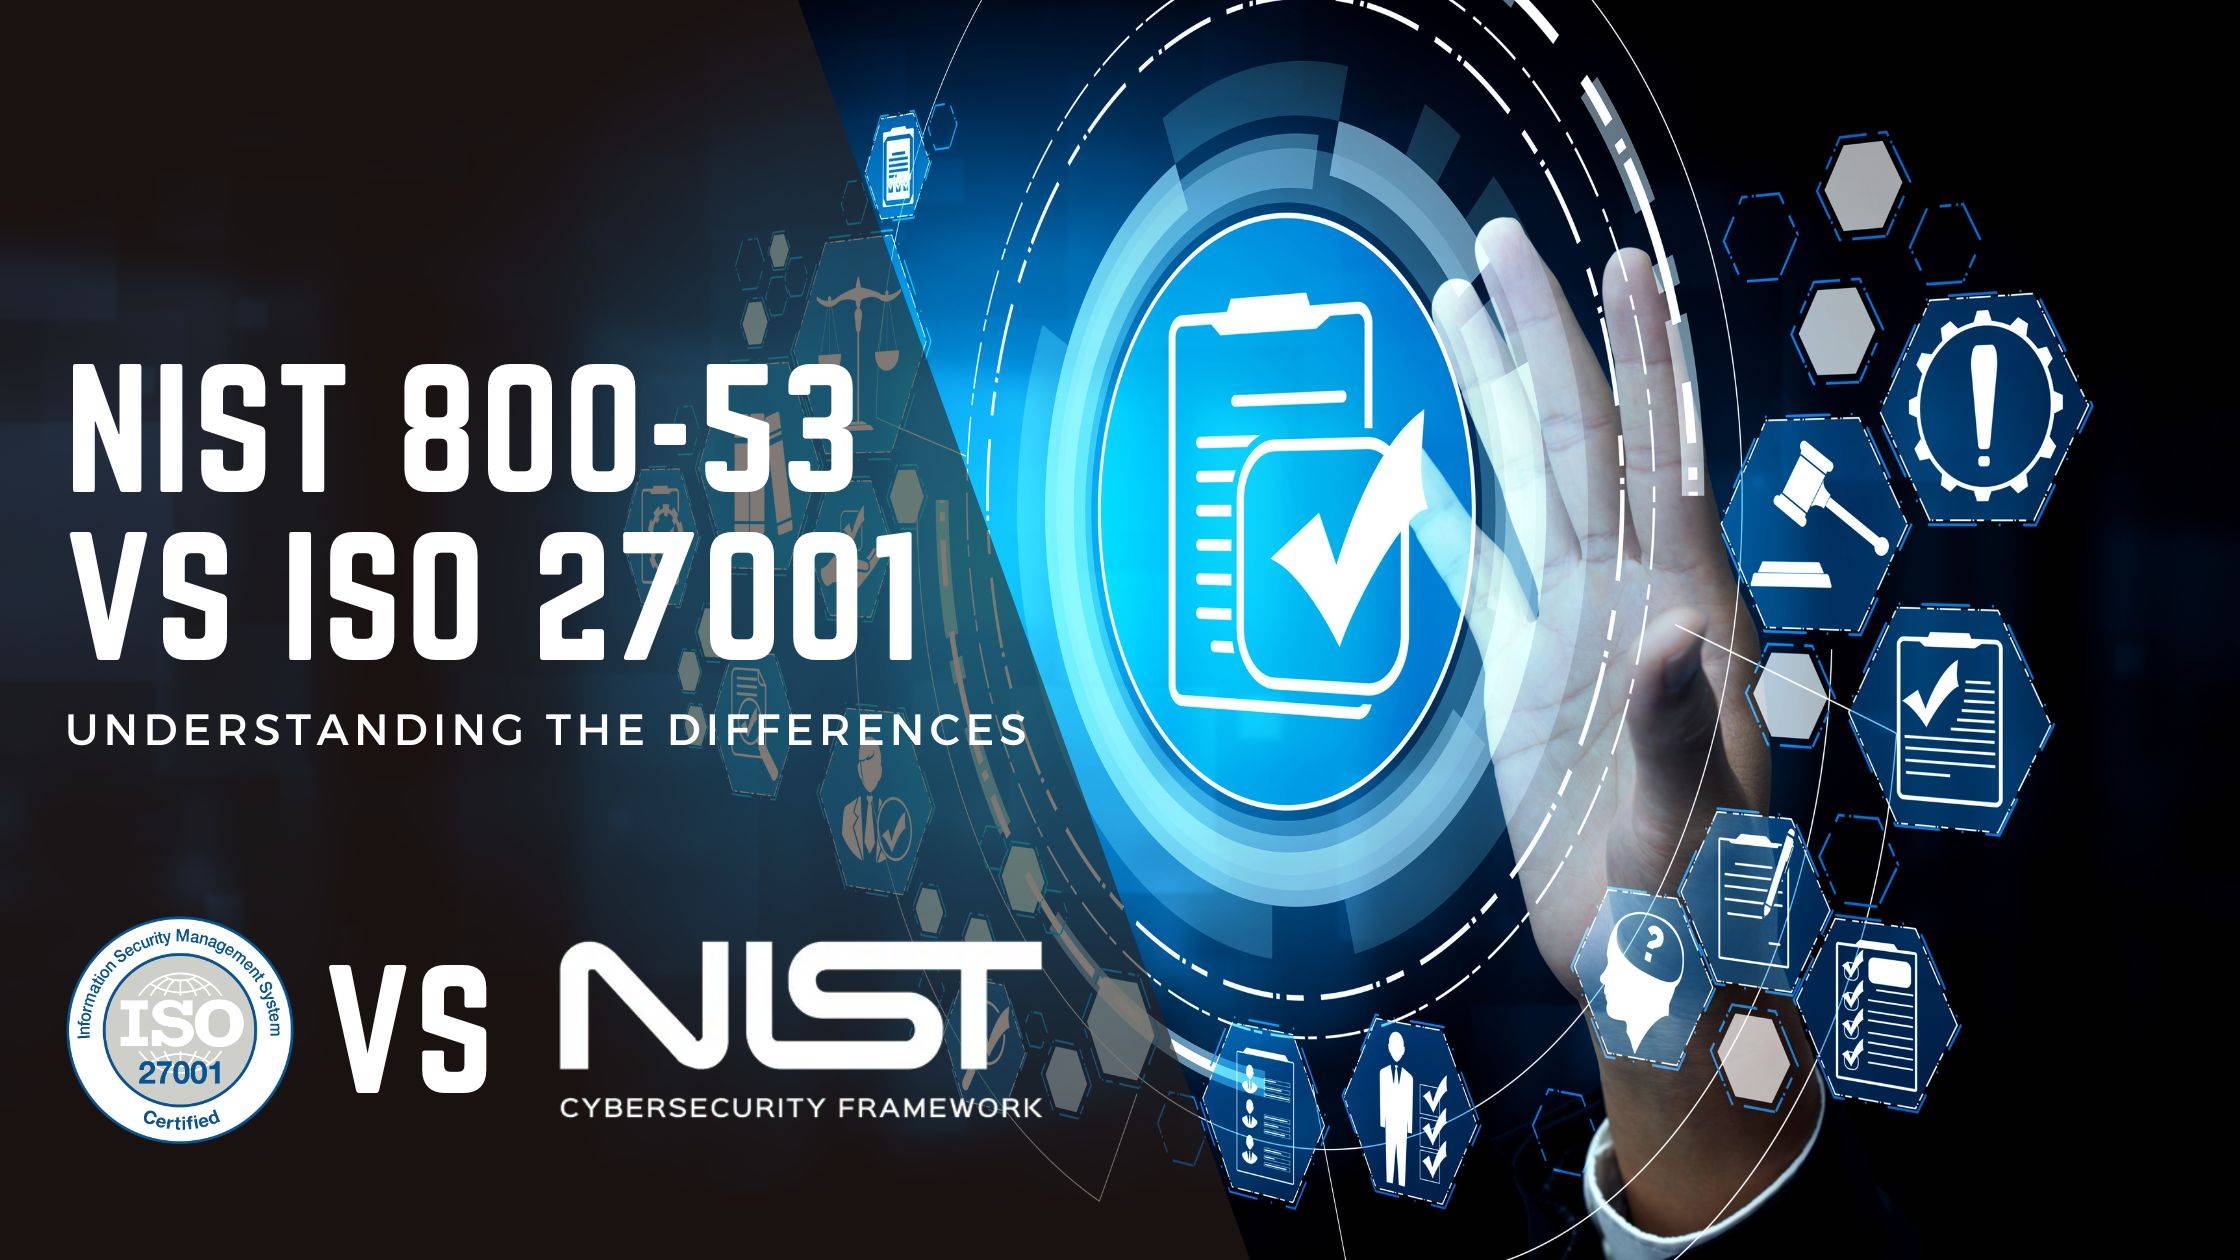 ISO 27001 vs NIST 800-53: Understanding The Differences